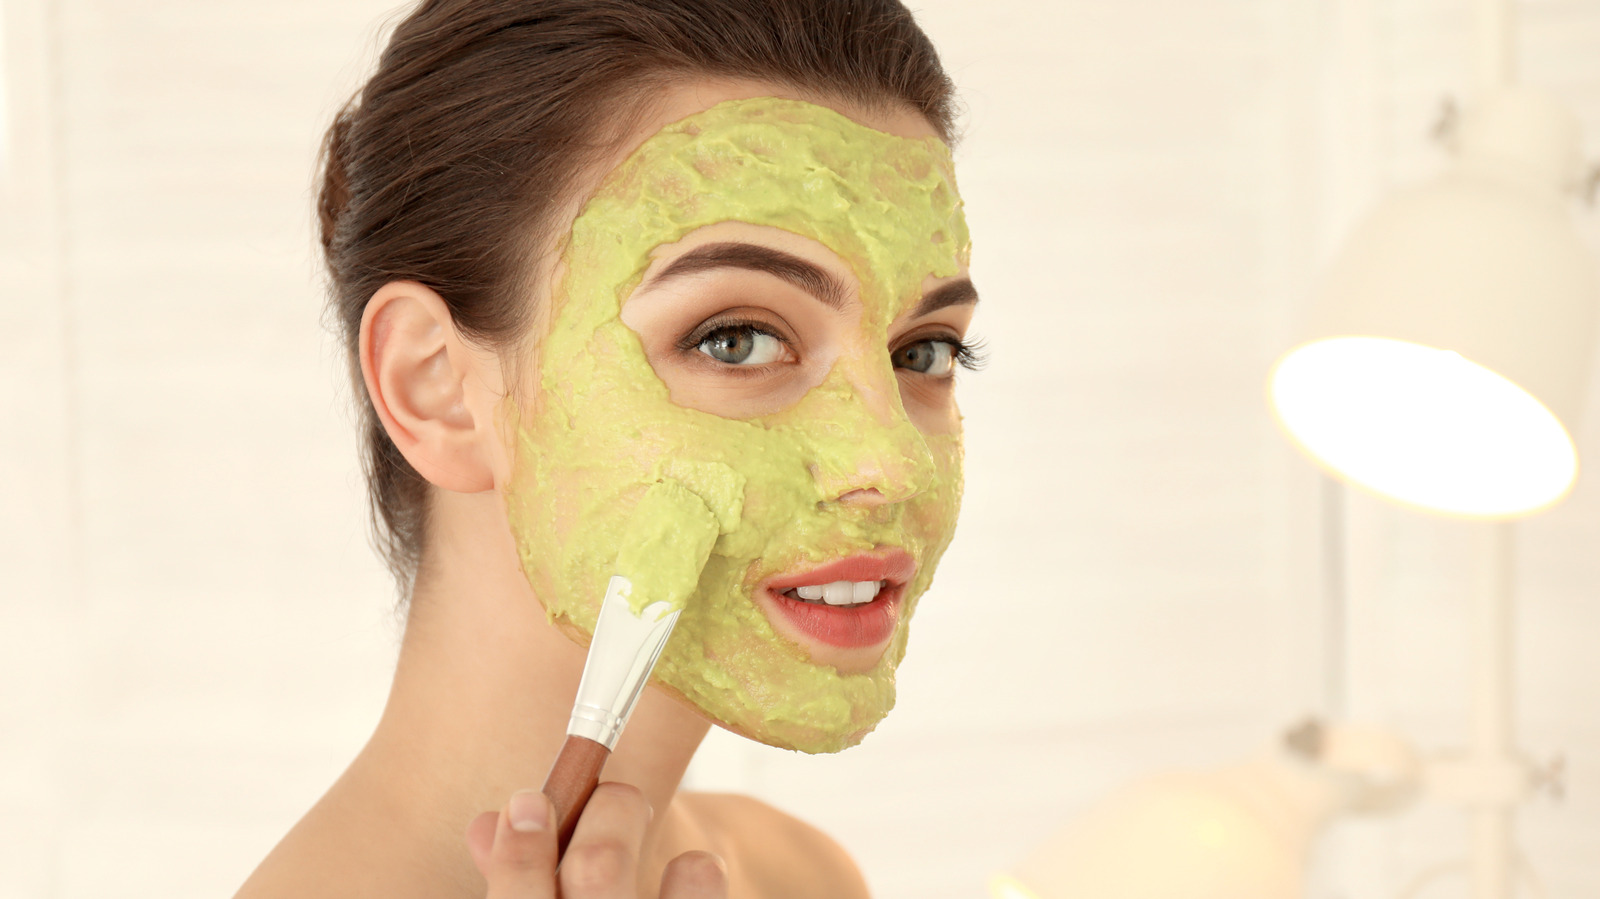 15 DIY Face Mask Ideas For Your Next Self-Care